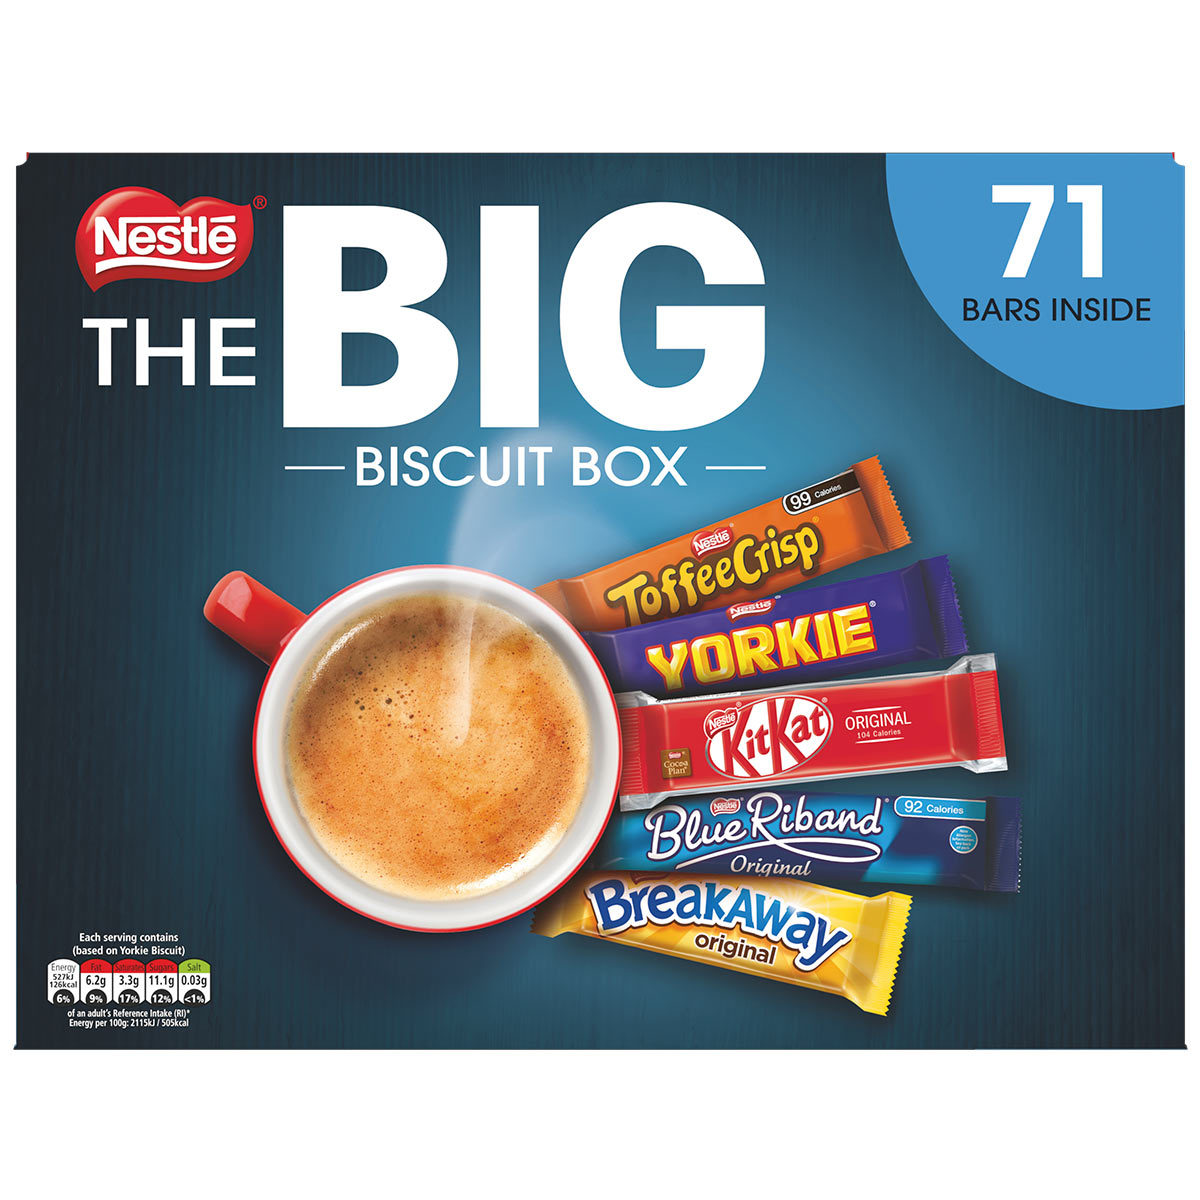 Image of The BIG Biscuit Box front face on a white background